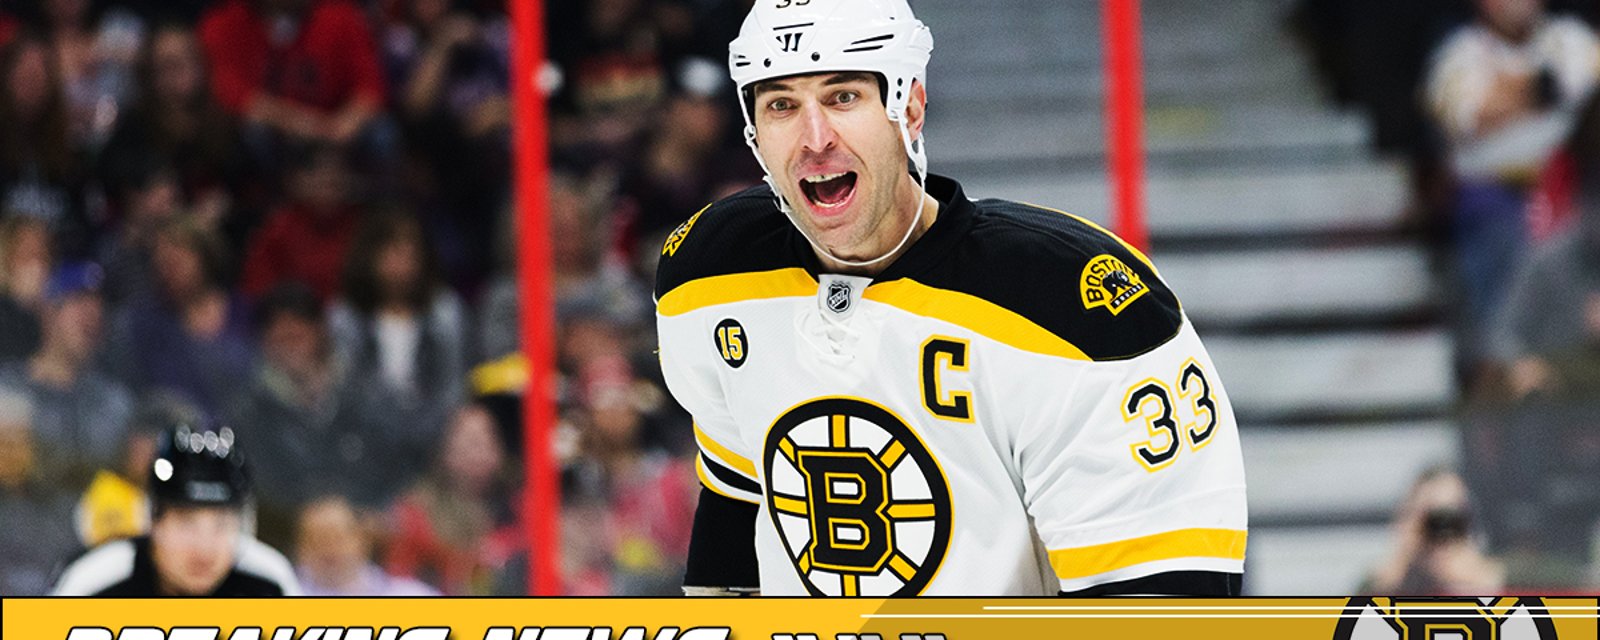 Chara nabs nomination with quality play this season!